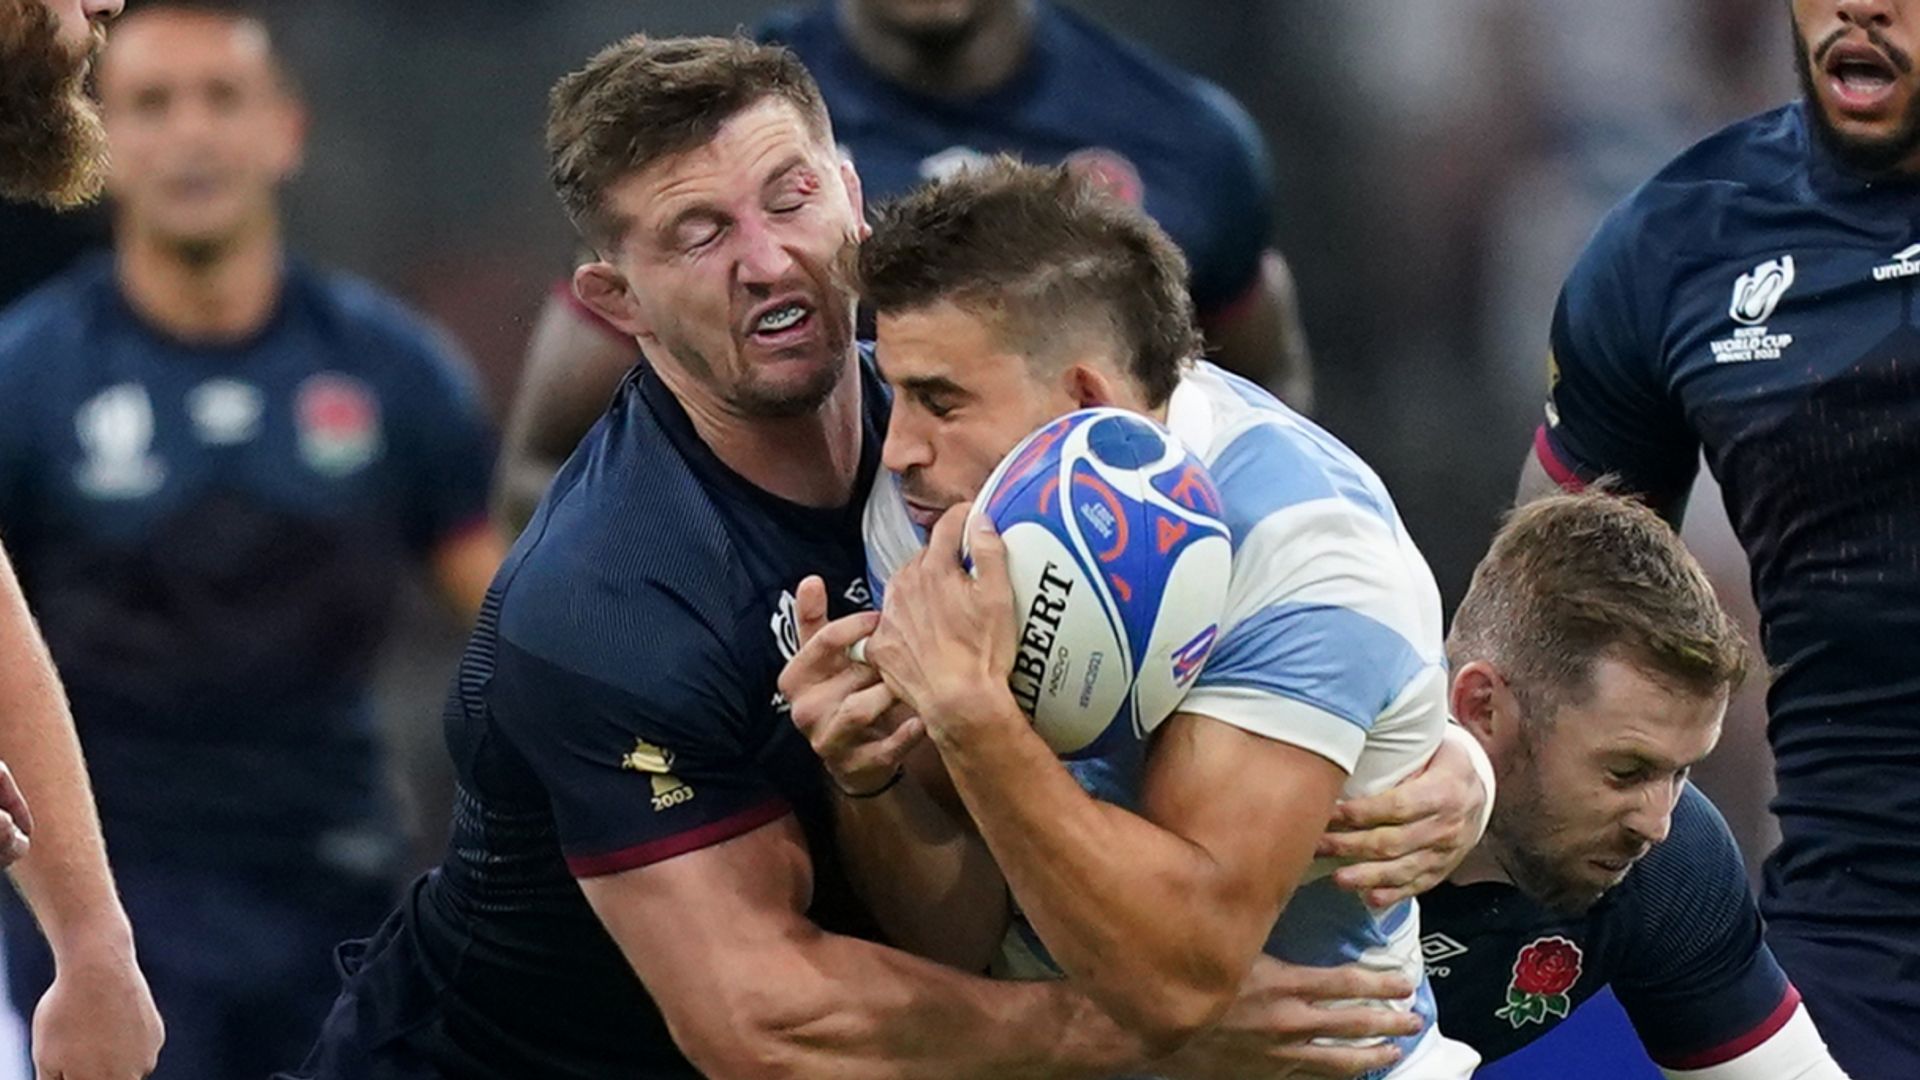 England's Curry banned for two games after Argentina red card